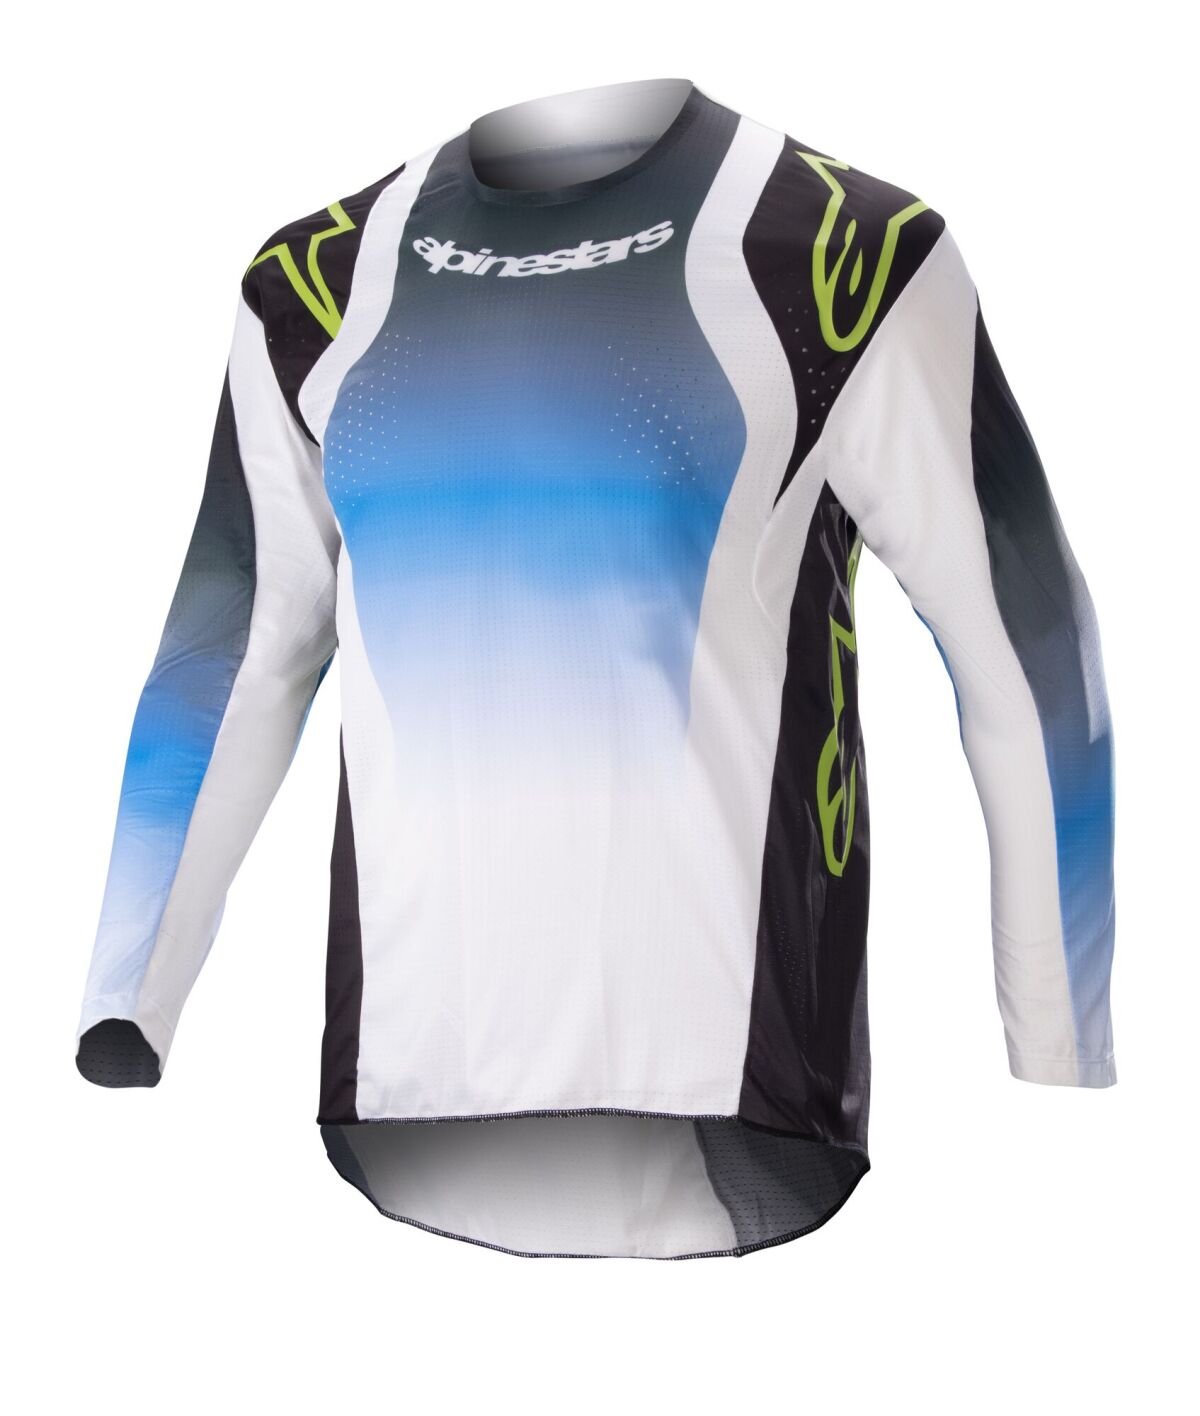 Youth Racer Push Jersey